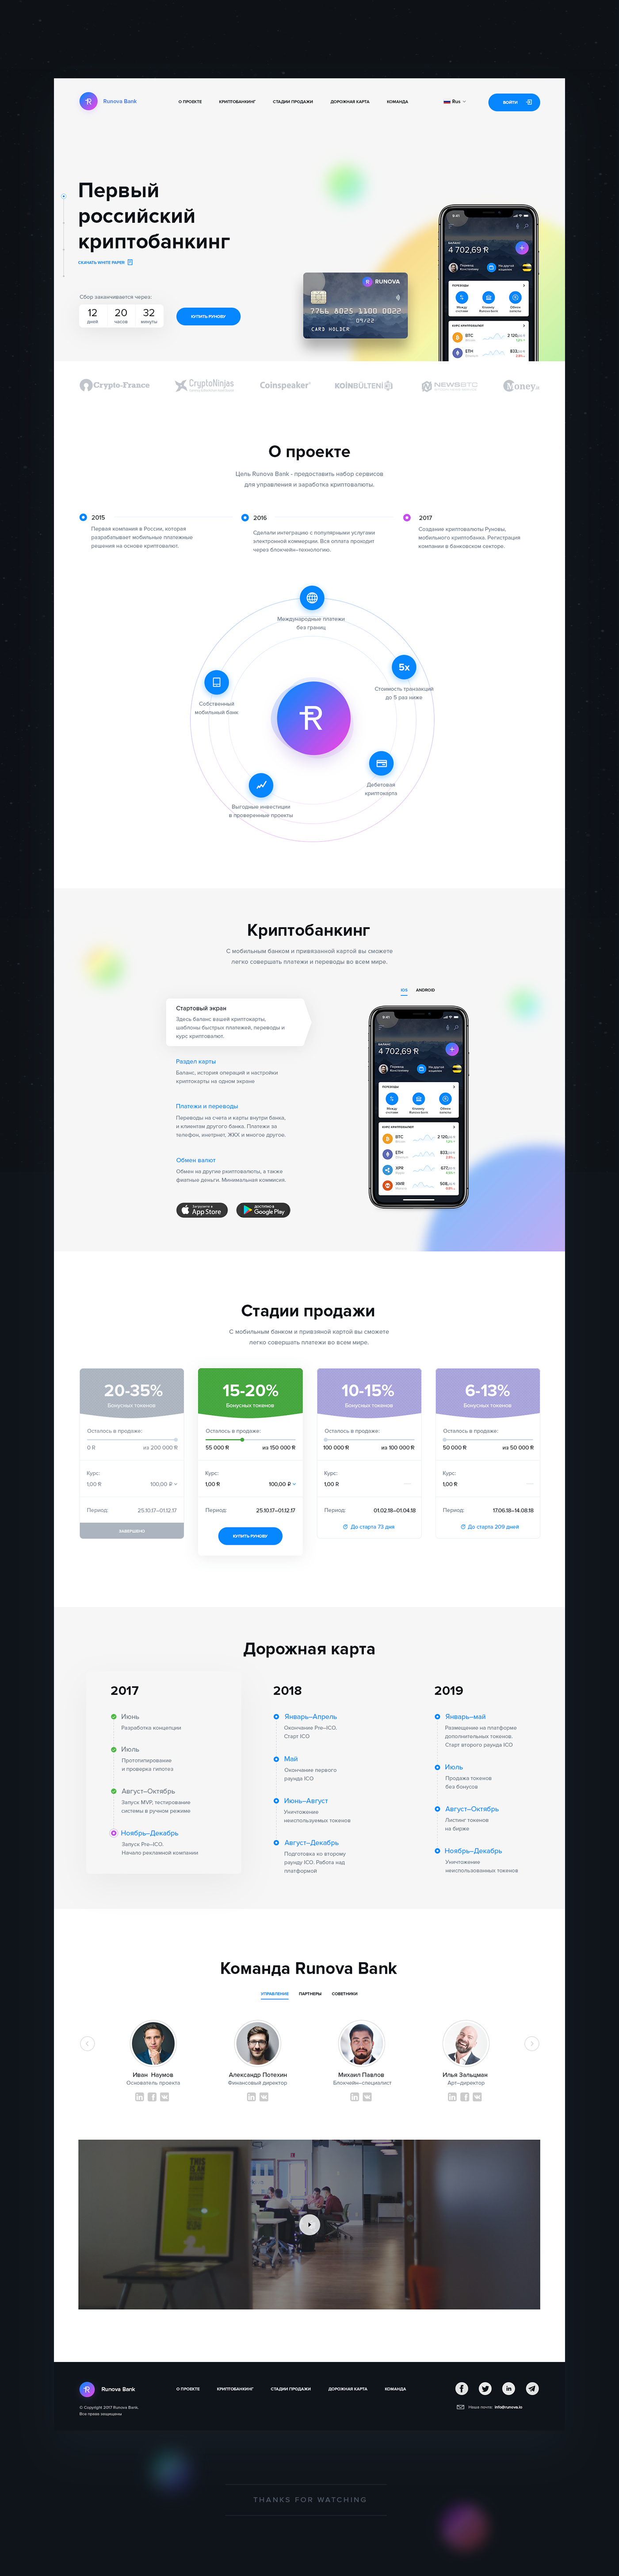 UI ux dashboard design Interface Bank banking Mobile app crypto-currency RDC